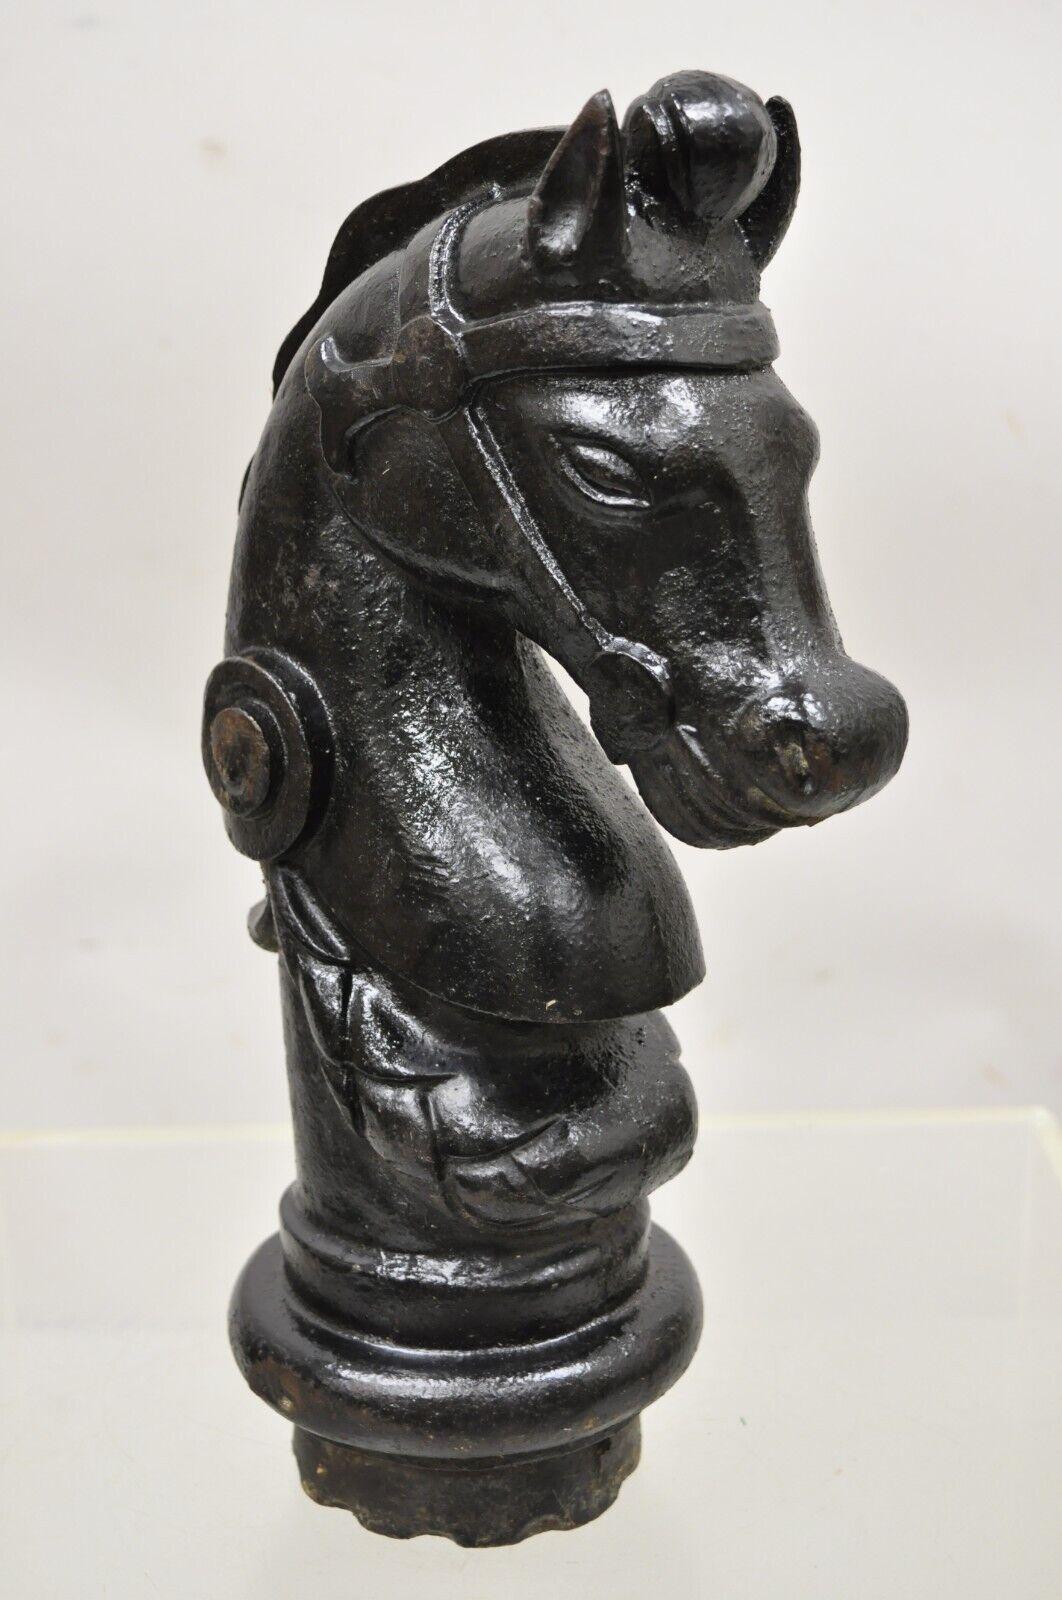 Antique 19th Century Cast Iron Horse Head Hitching Post Early American (A) Item features heavy cast iron construction, remarkable detail, black painted finish, very nice antique item, approx. 30 lbs. Circa 19th Century. Measurements: 15